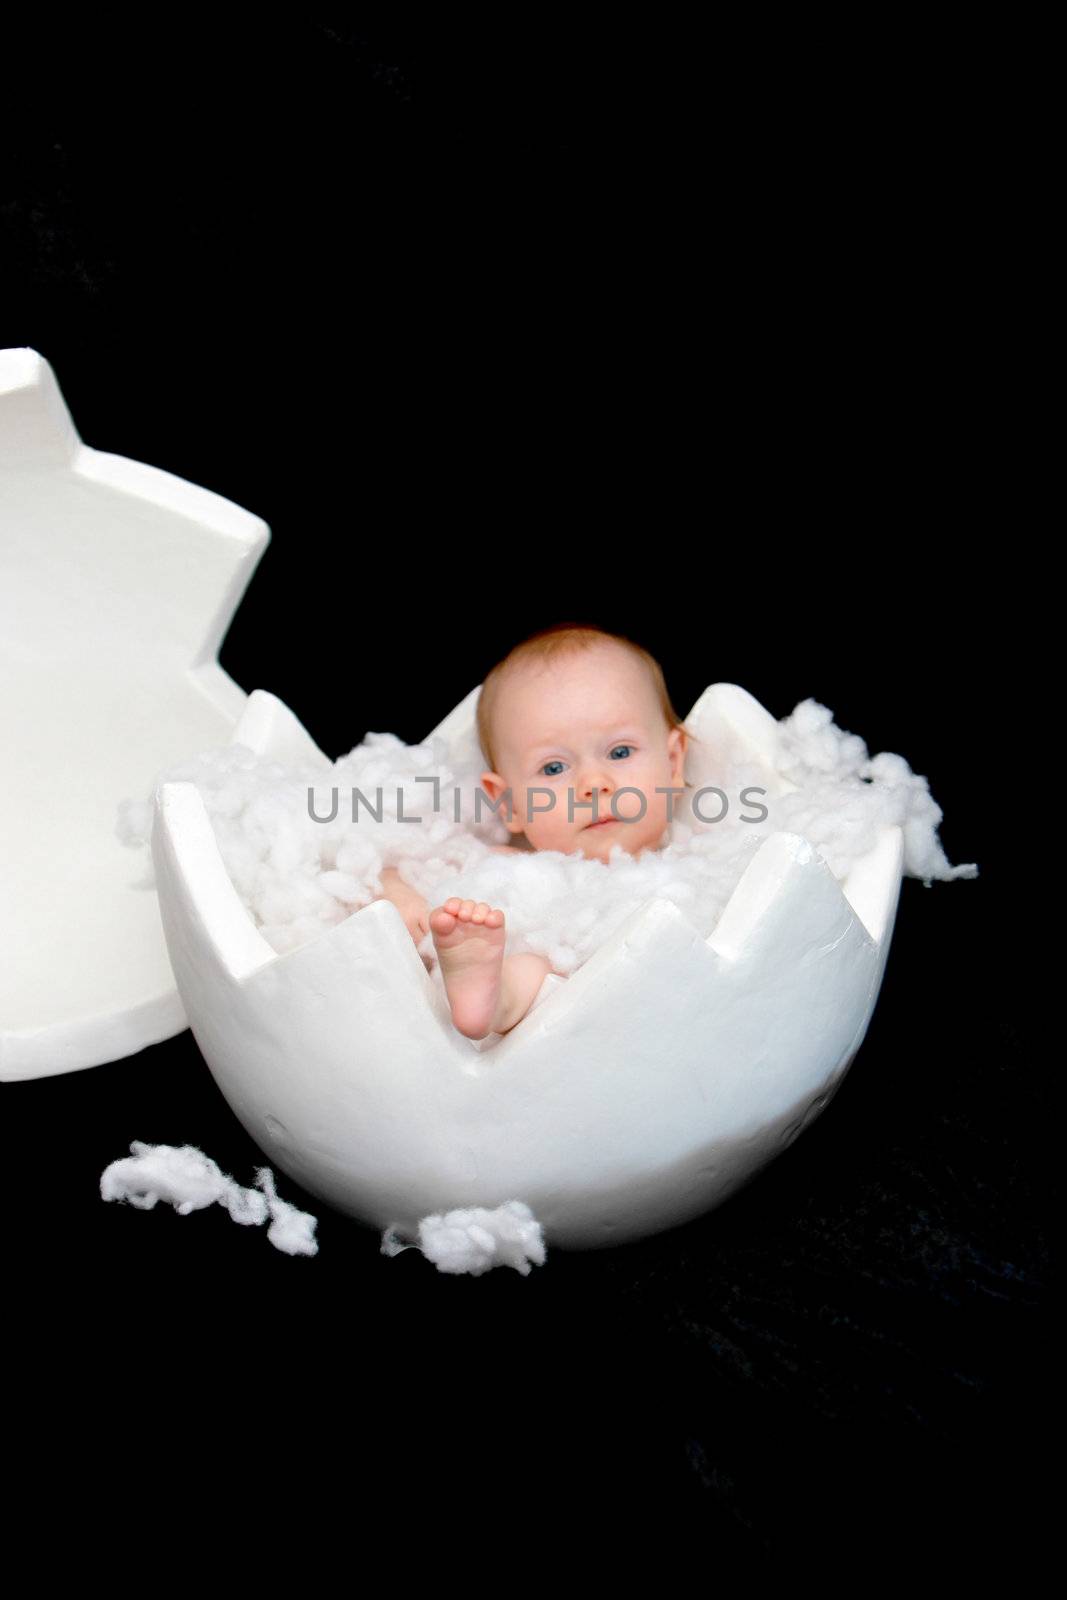 A baby sits in a large egg-shell by Farina6000